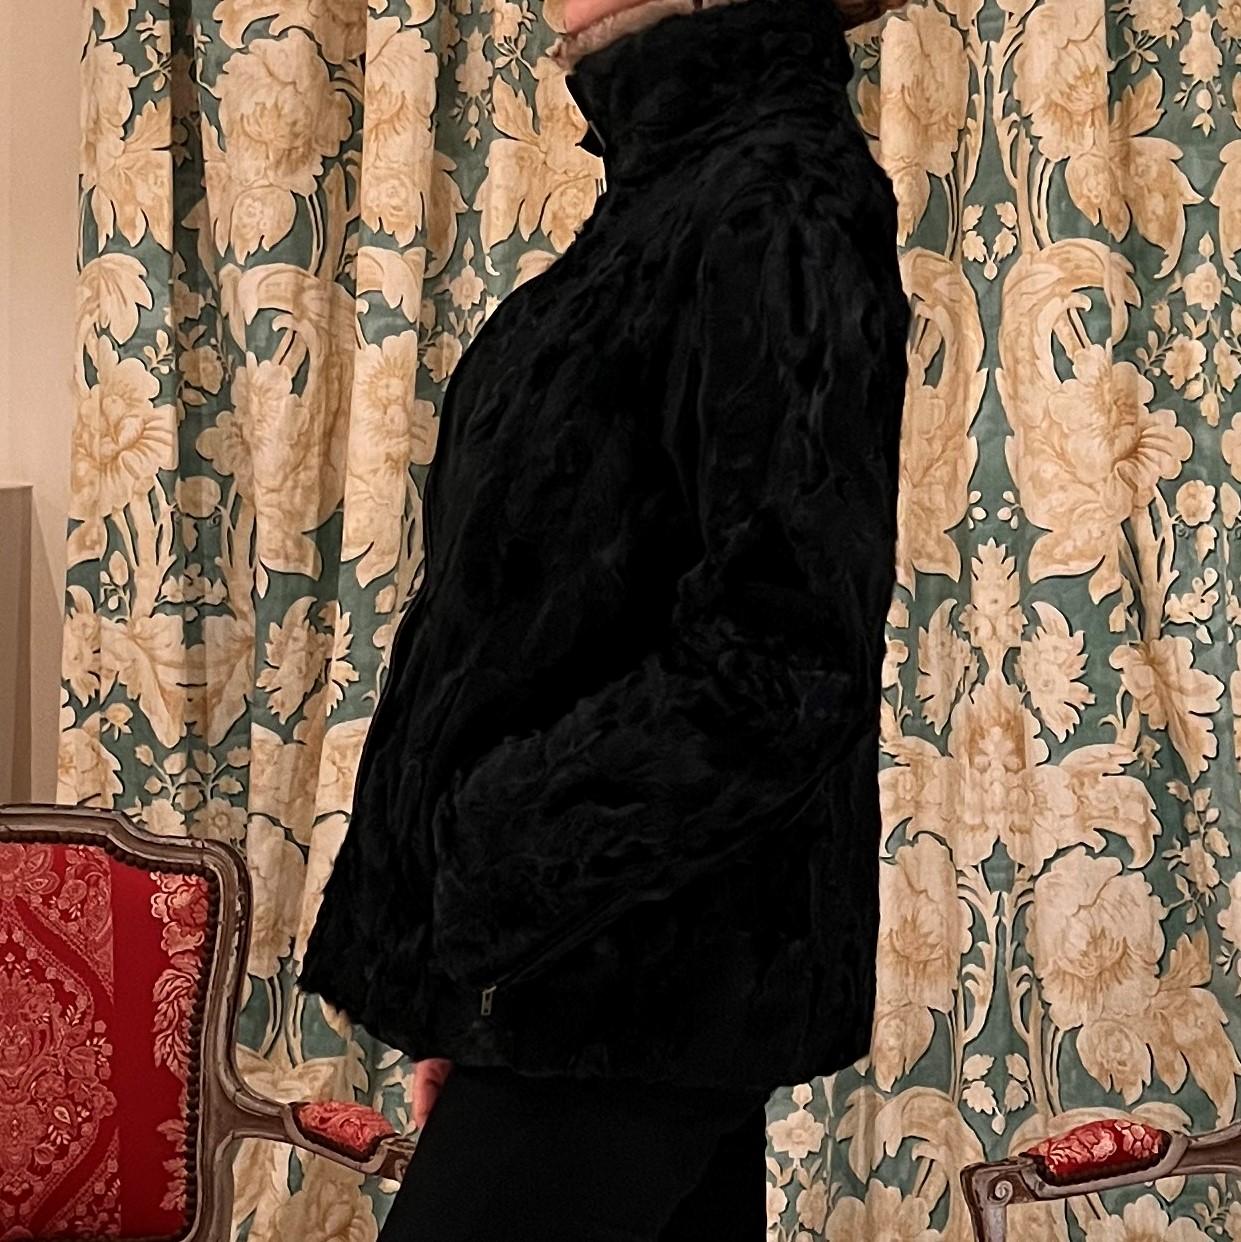 This special vintage persian lamb coat is from  karakul lambs.
100% Astrakhan Lamb Fur (Outer), 100% Silk (Lining) and Chinchilla Collar
The coat has 2 pockets and closes with a silver zipper 
Size: 44 FR /  10 US / 14 UK / EU L

Crafted in Andorra 